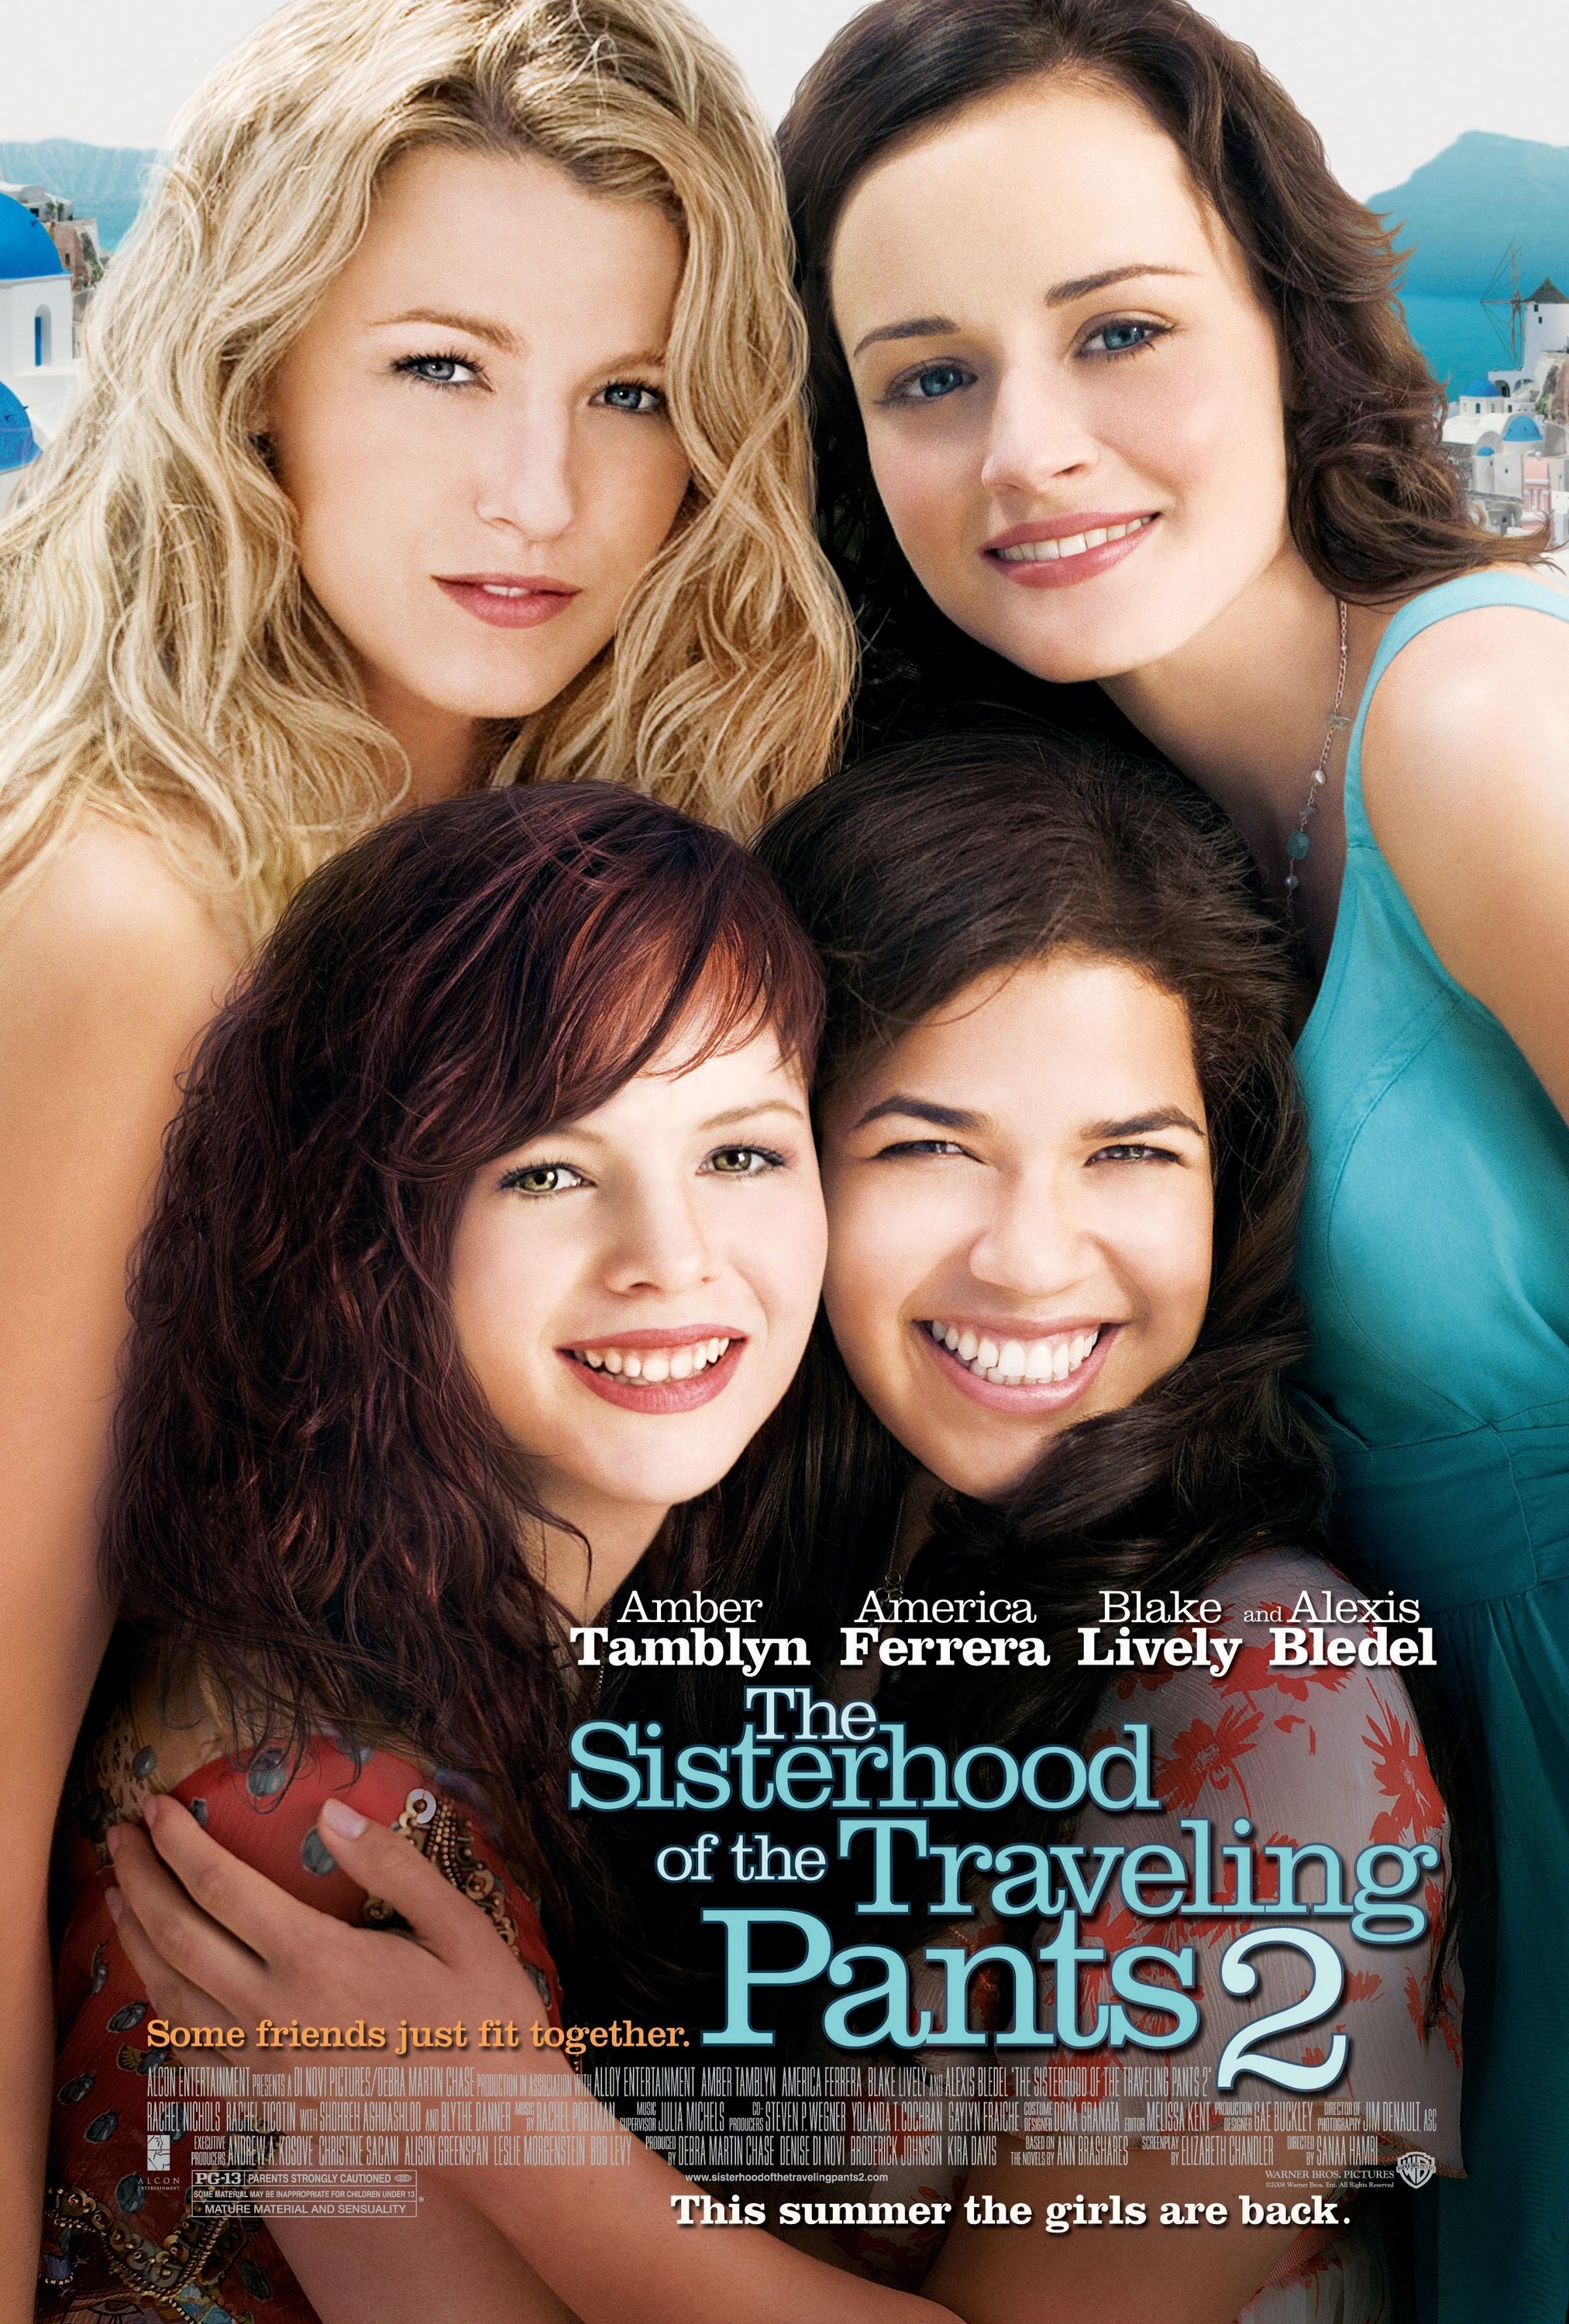 Mega Sized Movie Poster Image for The Sisterhood of the Traveling Pants 2 